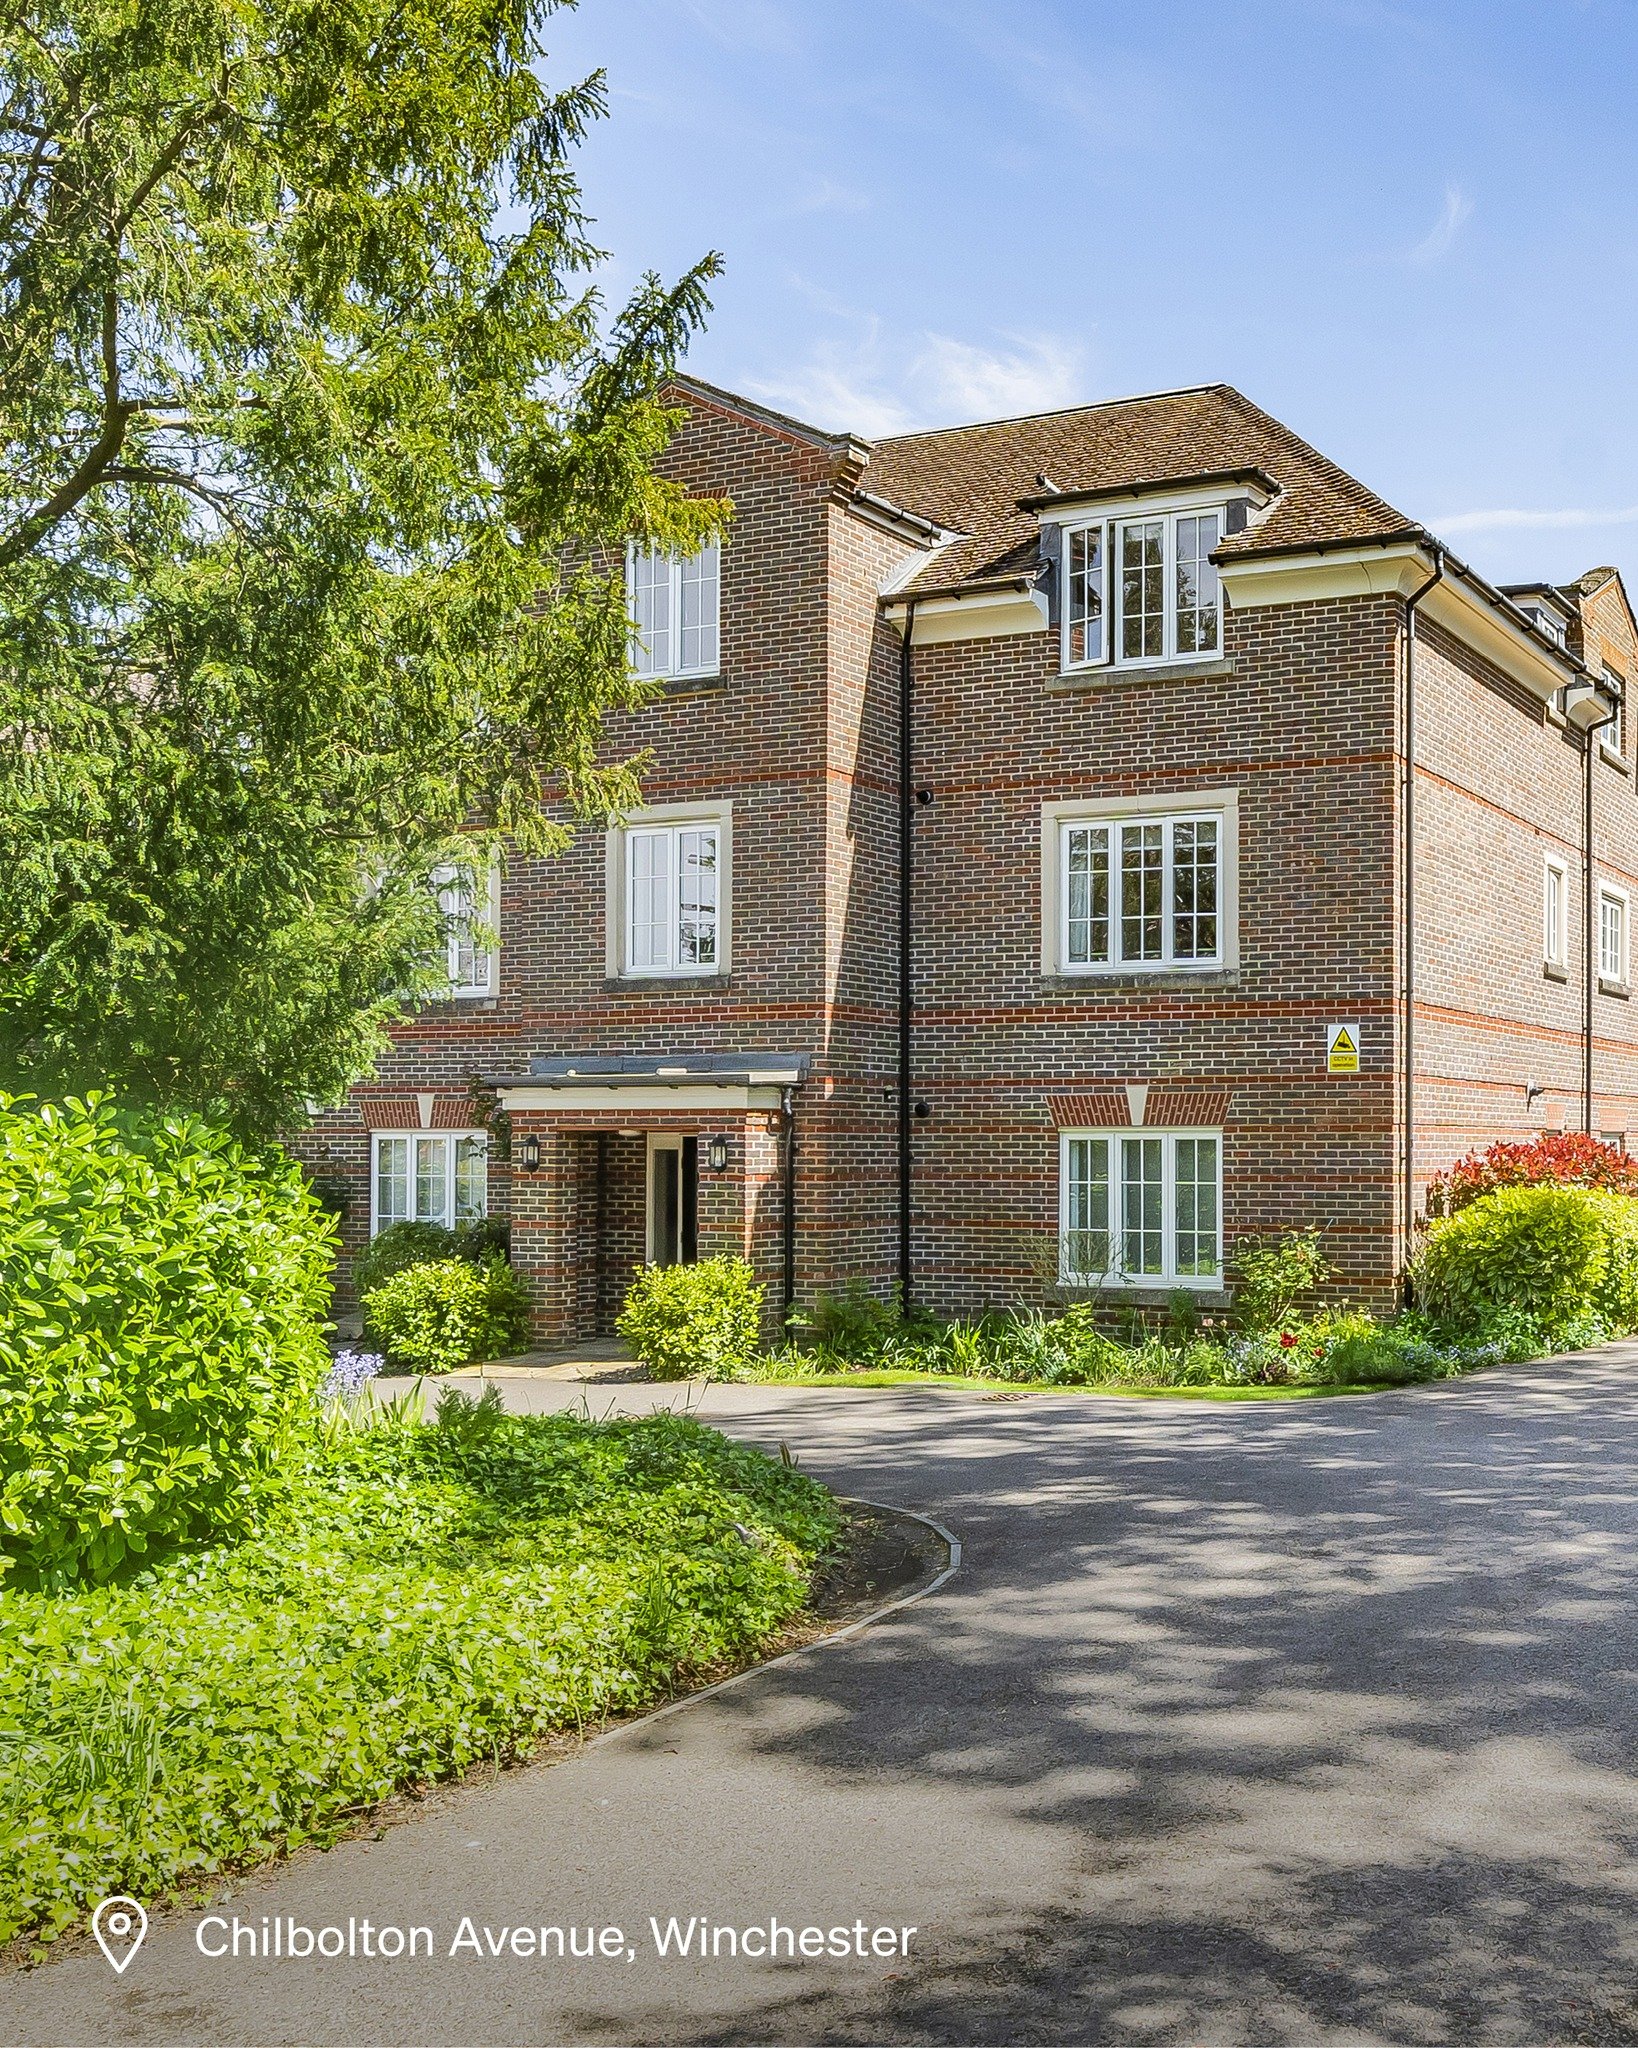 #ForSale This exceptional 2-bedroom duplex maisonette is tucked away on Chilbolton Avenue, one of Winchester&rsquo;s most prestigious roads. Boasting a captivating blend of modern elegance and functionality&hellip; this home is truly stunning.

📍 Th